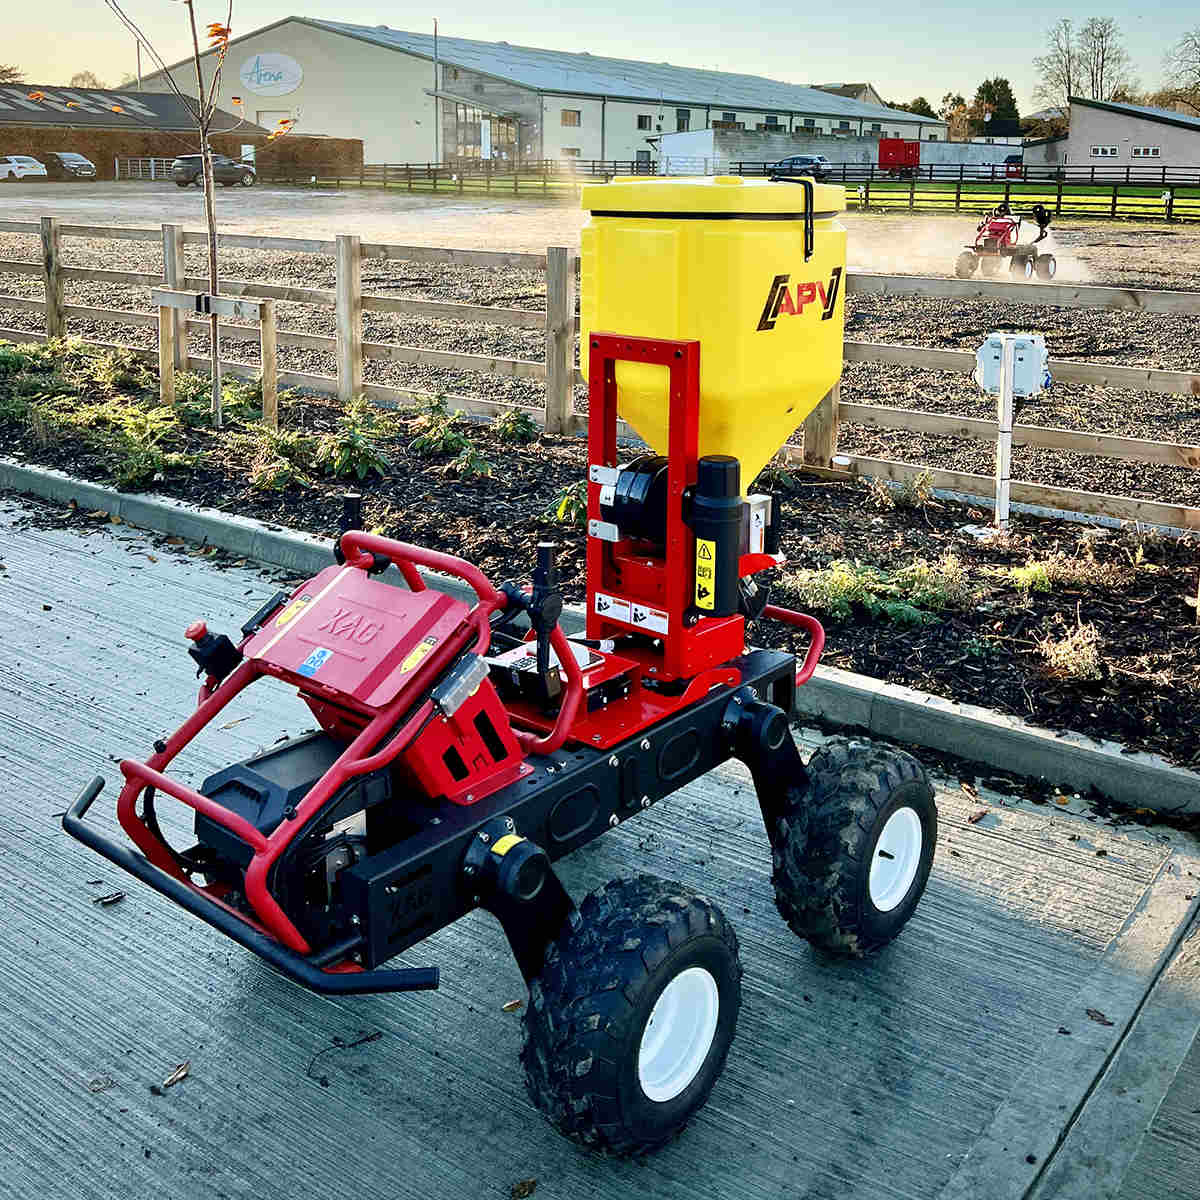  "While the original me is amazing cool, I might go with a different choice to extend my payload for the Robotic Farming Demonstration Day." Broadcast in wet winter fields with ease.